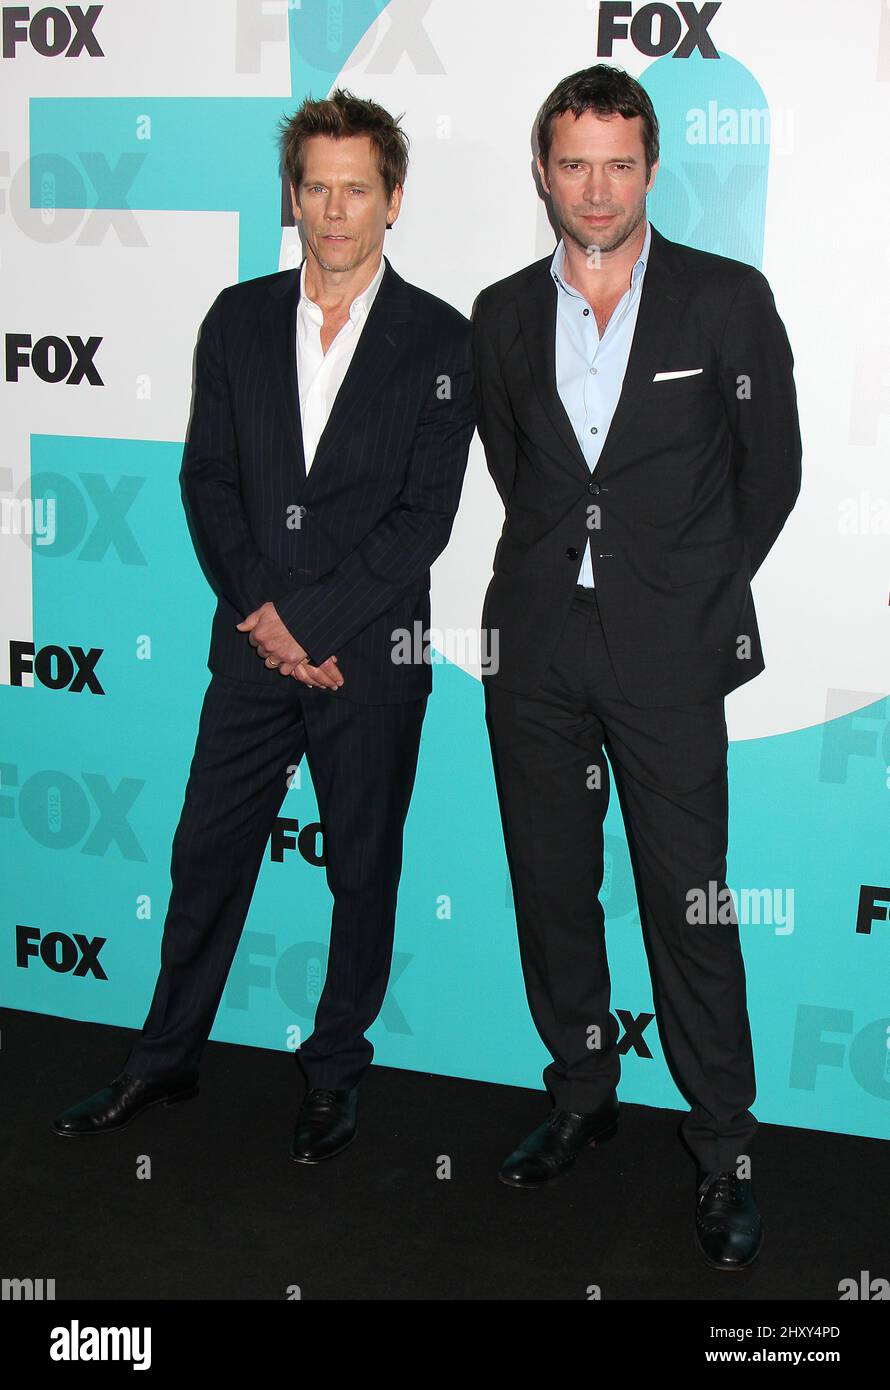 Kevin Bacon and James Purefoy attends the FOX 2012 Upfront presentation held at Wollman Rink in Central Park. Stock Photo